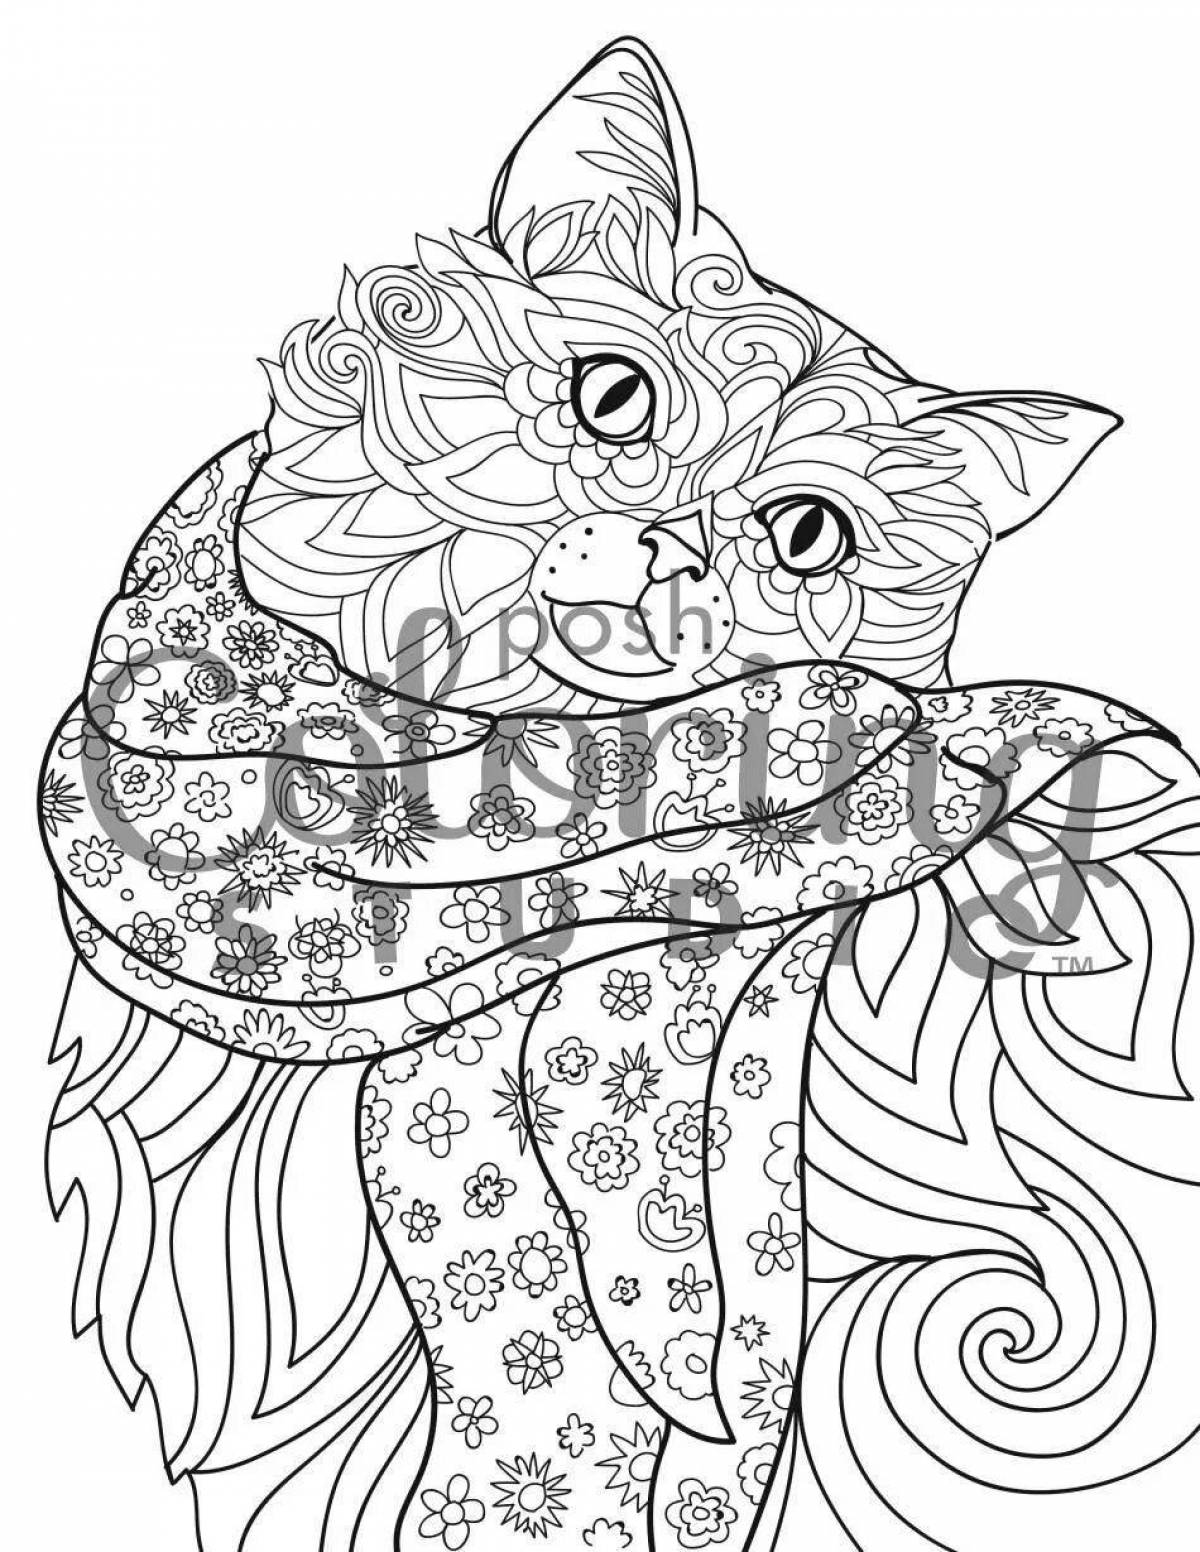 Elegant coloring book for girls 12 years old - cats